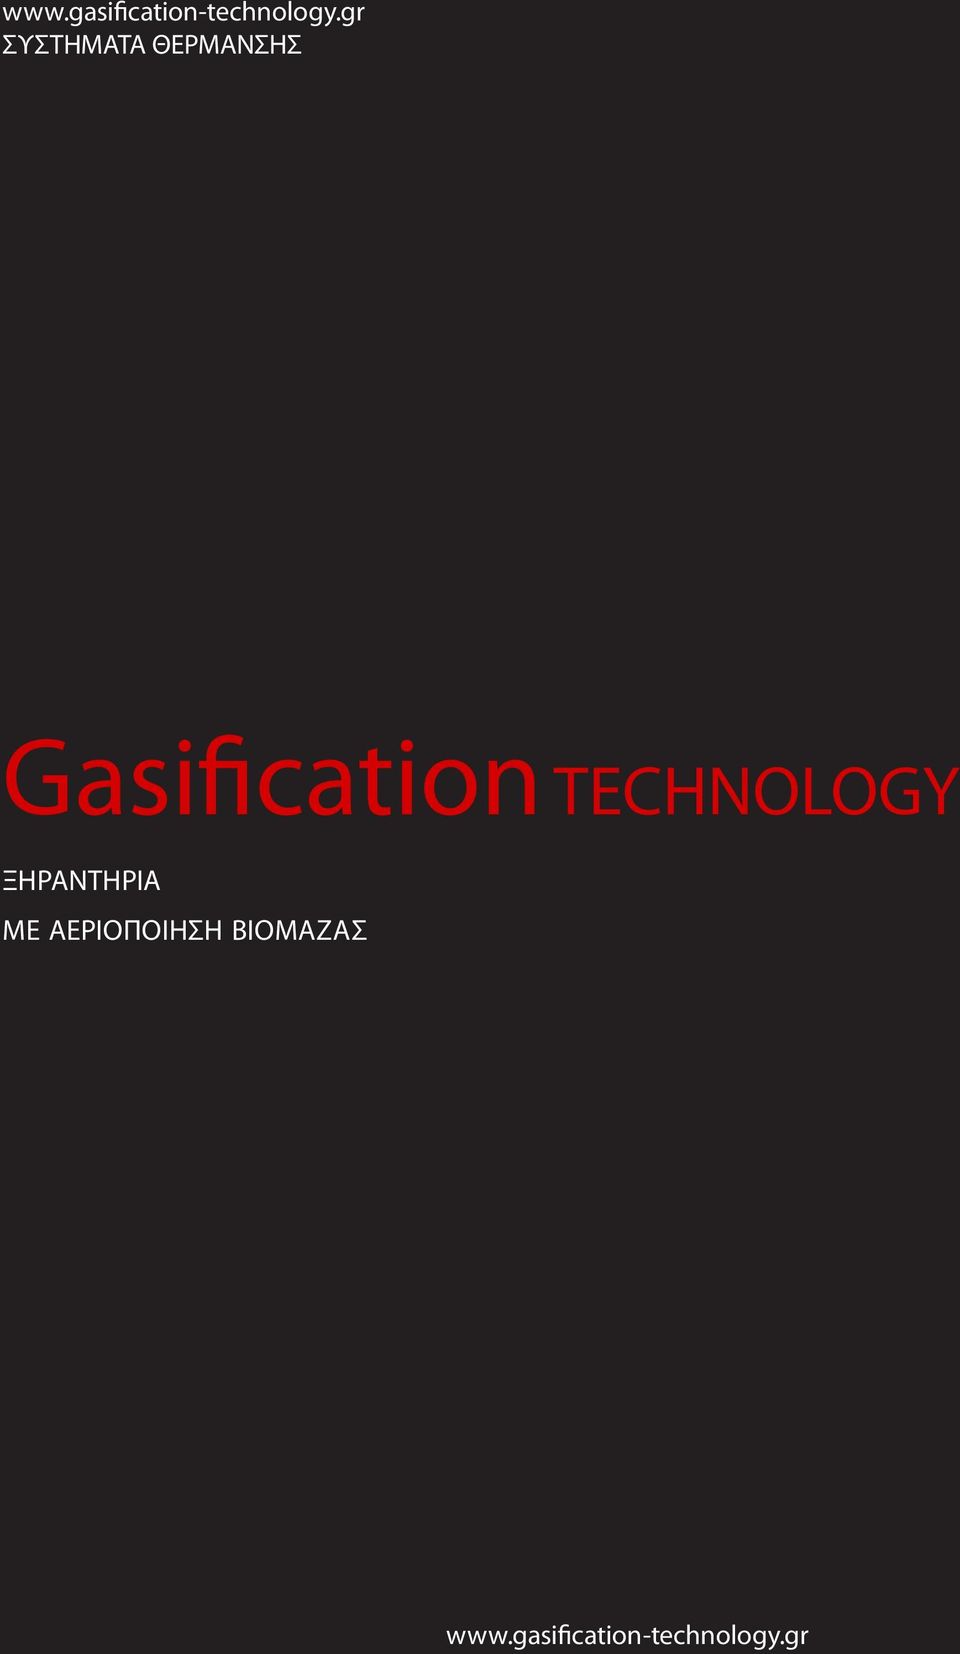 Gasification TECHNOLOGY ξηραντηρια